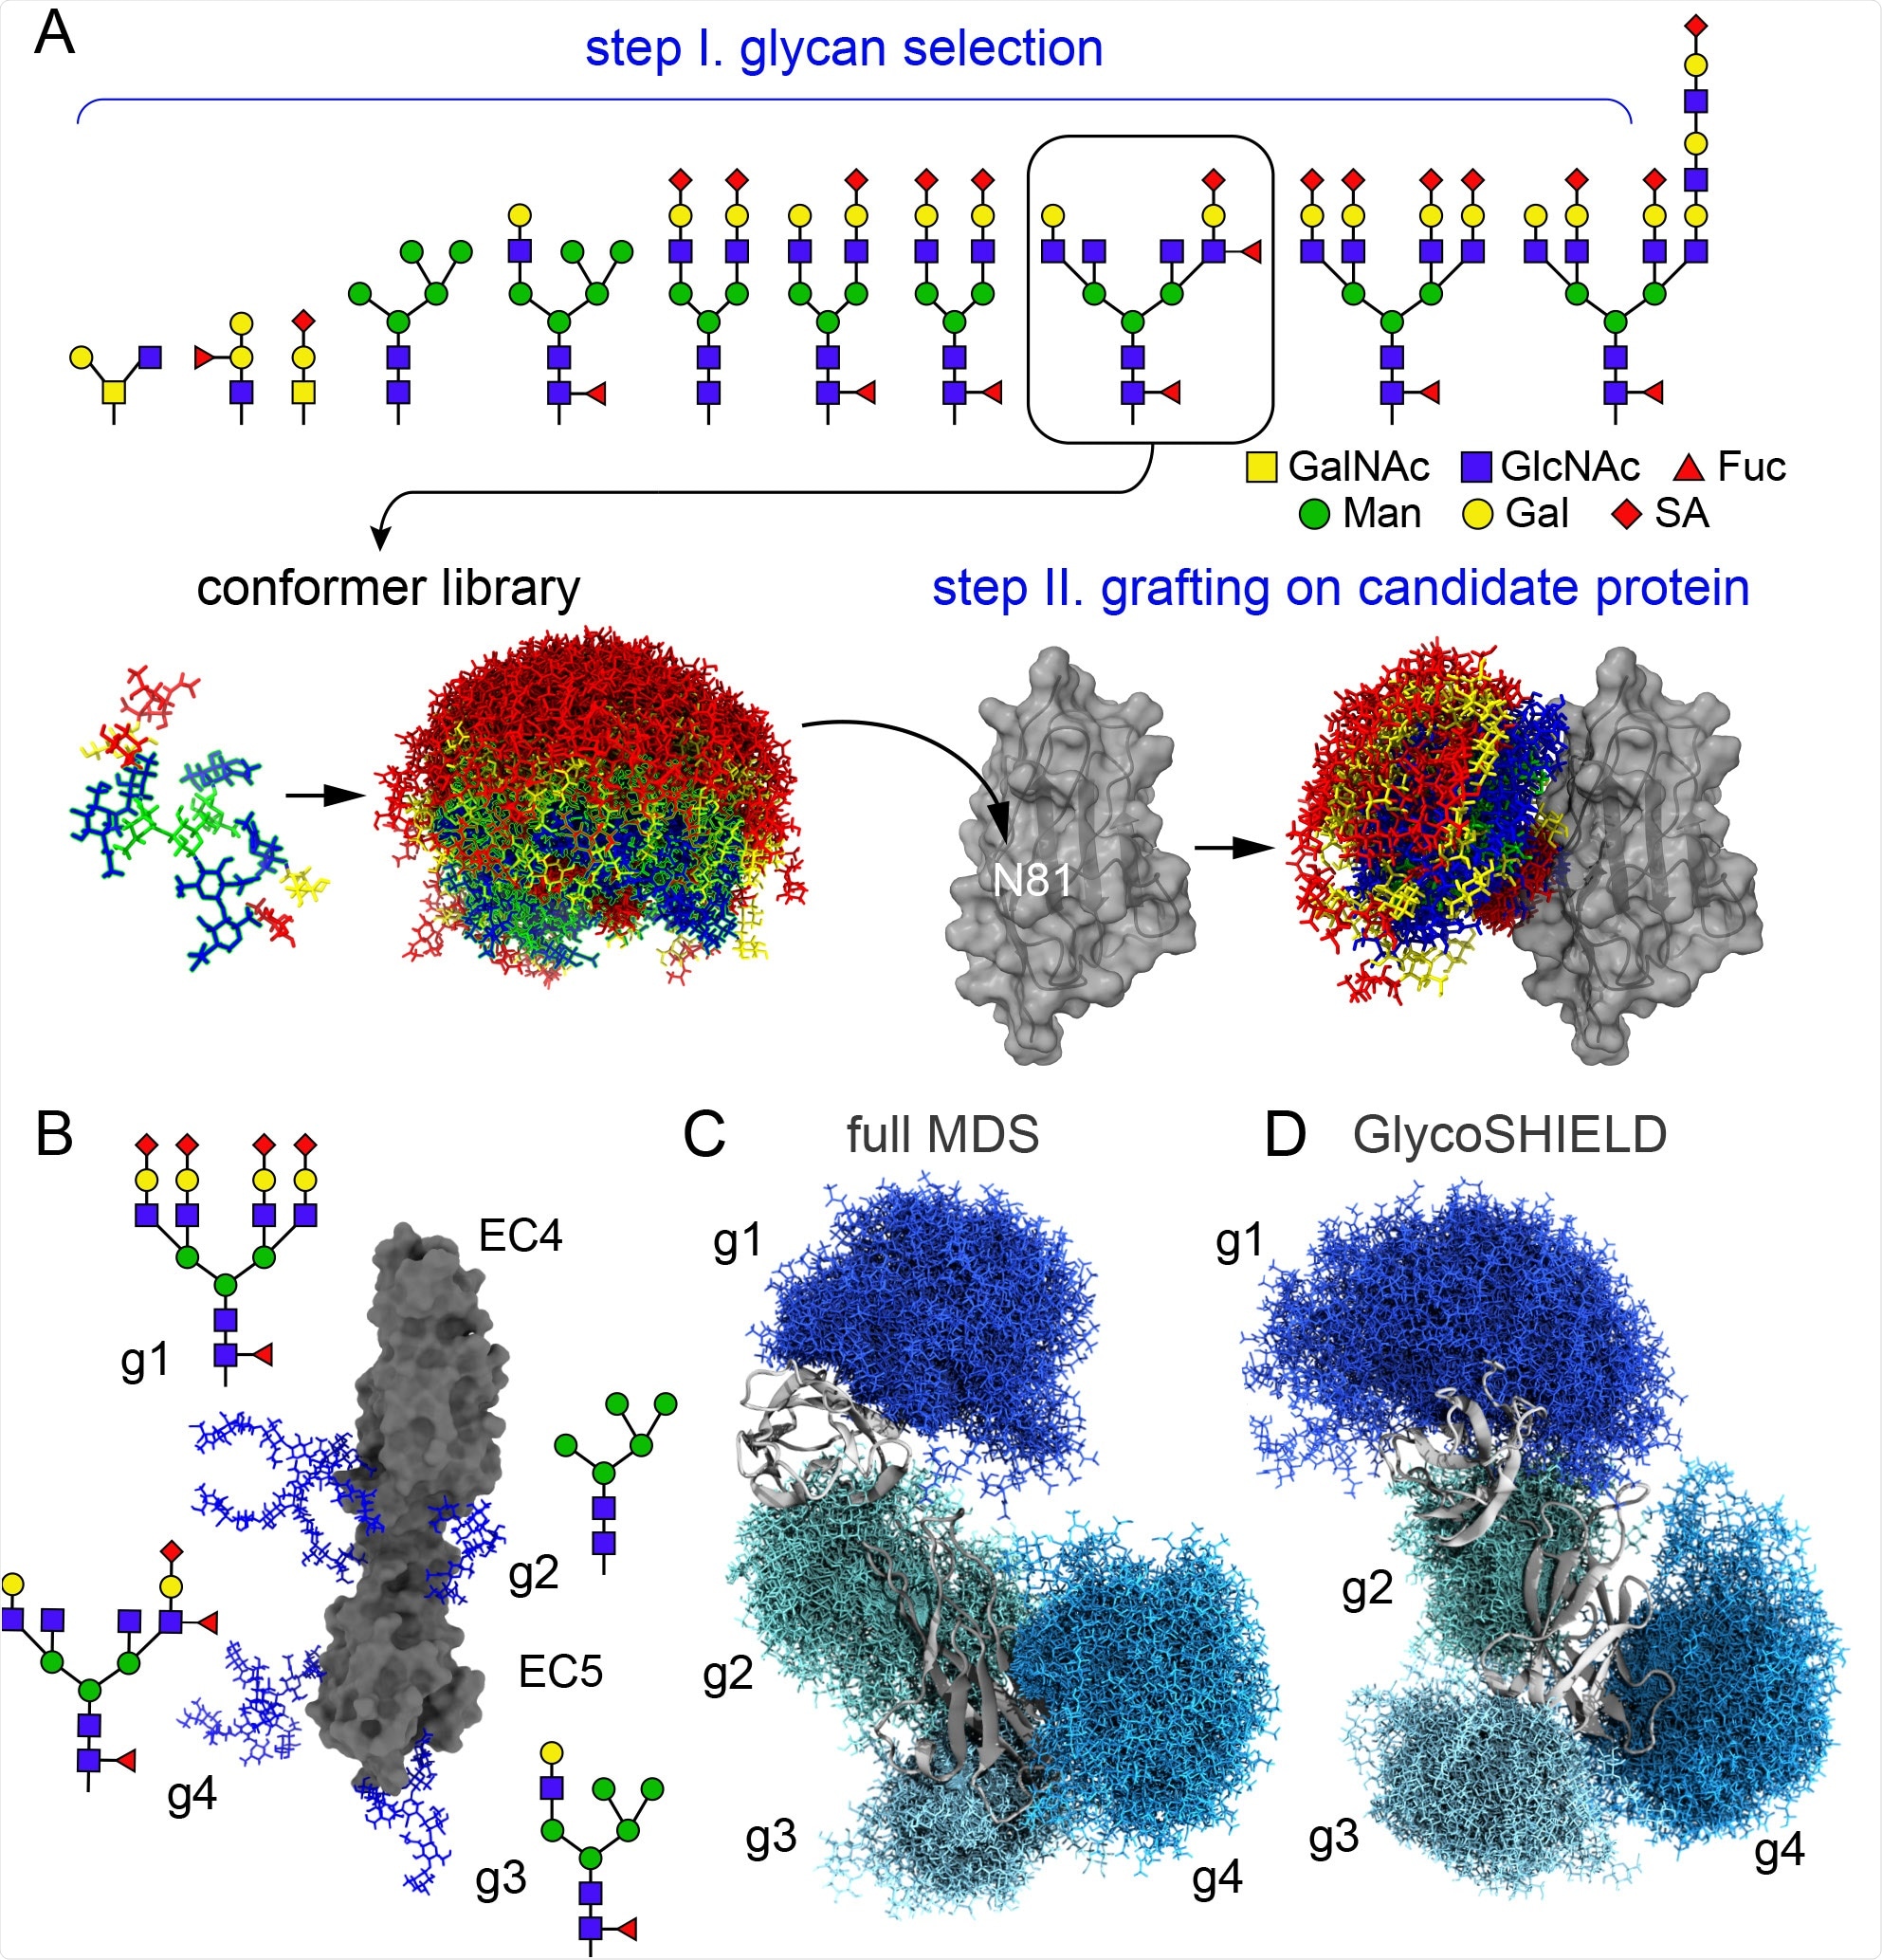 GlycoSHIELD generates realistic glycan shields A) Overview of the pipeline: user provides a 3D protein structure with defined glycosites where glycans from the library of conformers not clashing with the protein are grafted and exported for visualization and analysis (GalNac: N-Acetylgalactosamine, GlcNac: N-Acetylglucosamine, Fuc: fucose, Man: mannose, Gal: galactose, SA: sialic acid). B) Structure of N-cadherin EC4-EC5 model system with four distinct N-glycans as indicated at each glycosylation site (g1-g4). C) -D) Glycan conformers generated by full MDS (C) or with GlycoSHIELD (D) after alignment on EC4-EC5. Note the comparable morphology and span of the glycan shields obtained by the two approaches.